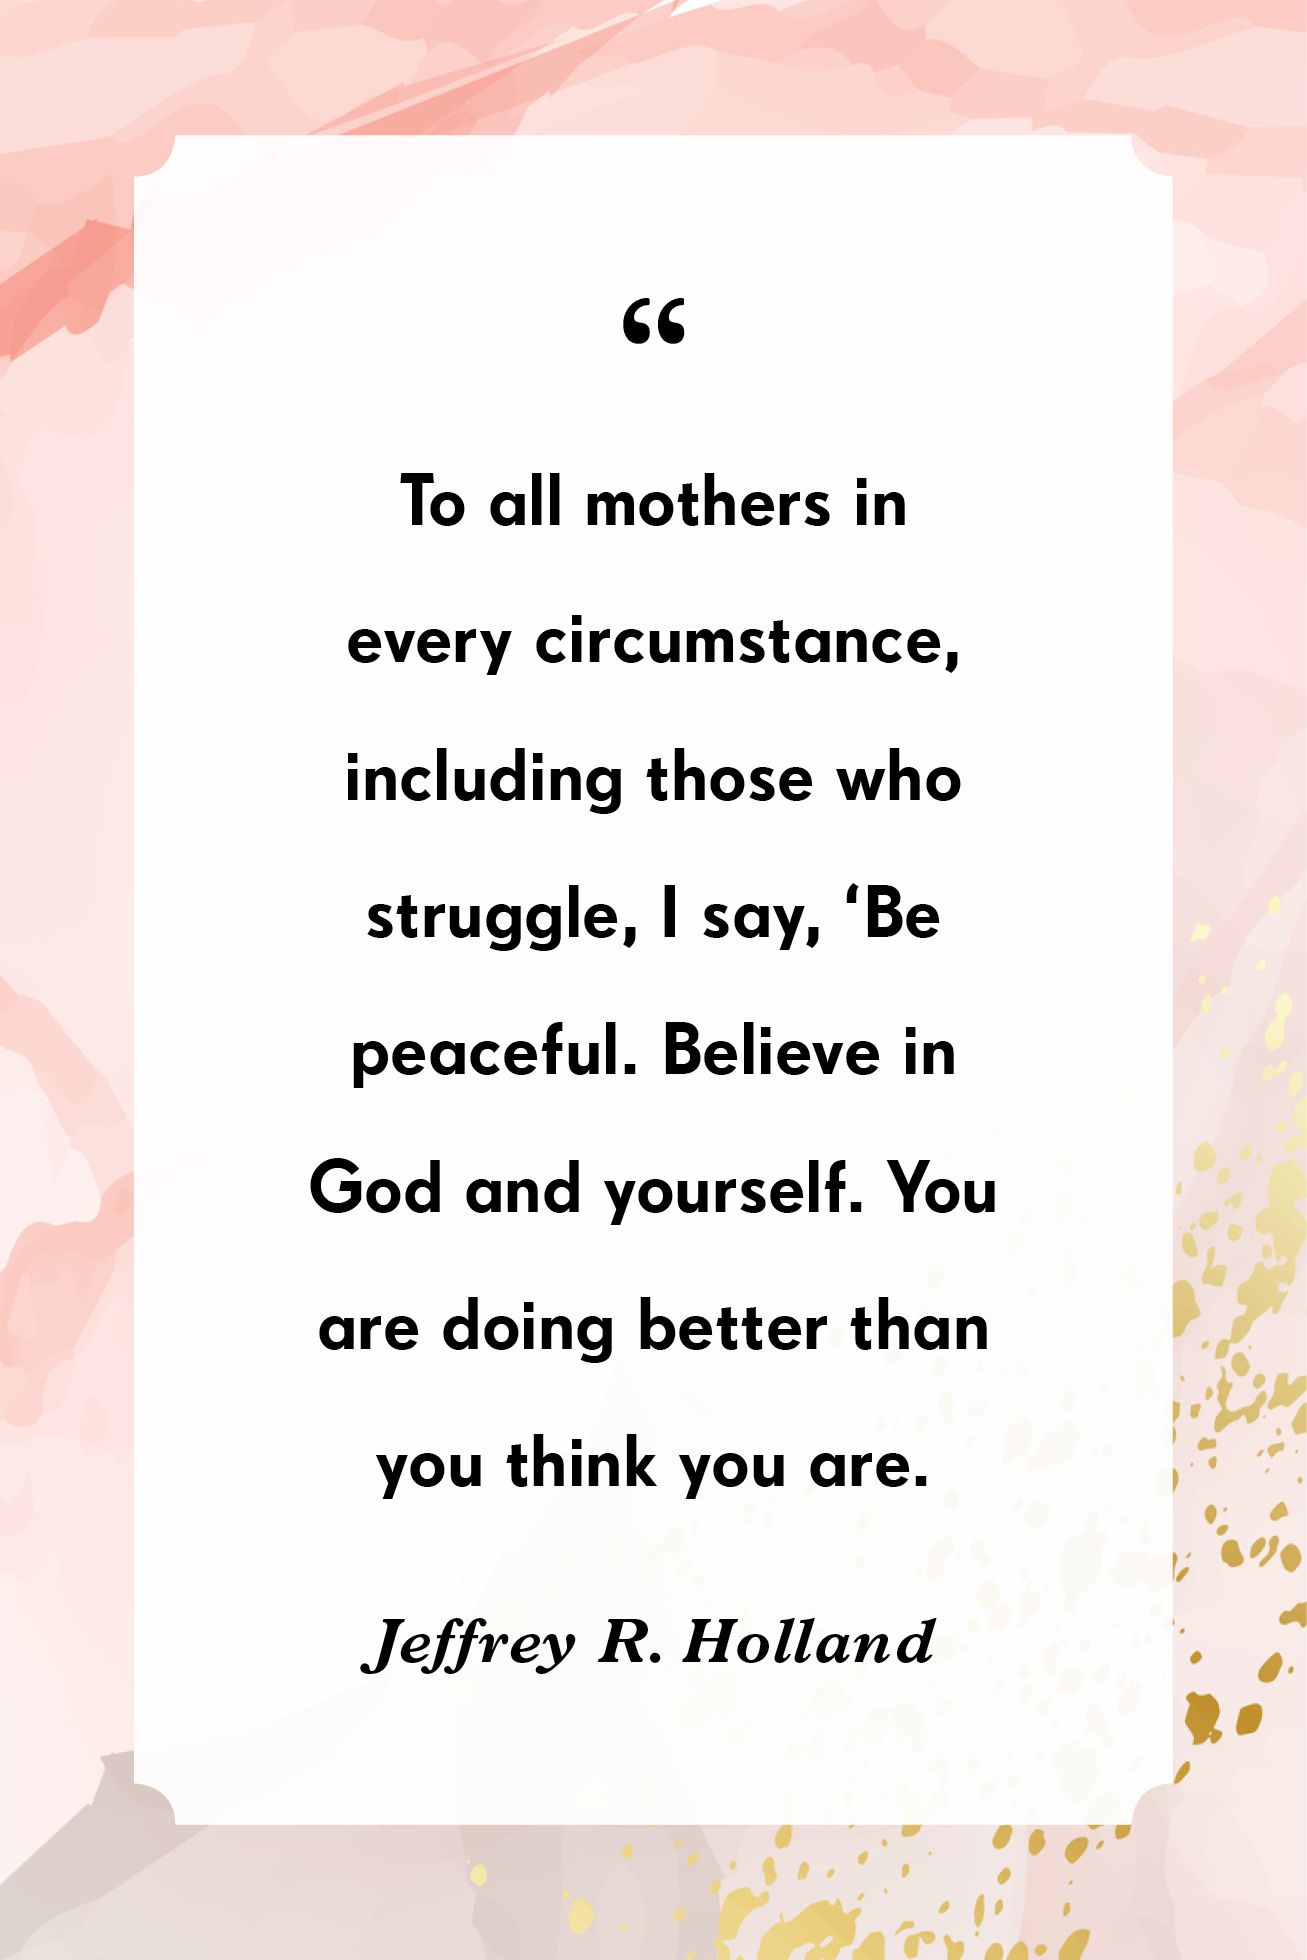 21 Mom Quotes Every Strong Mama Needs to Hear Today